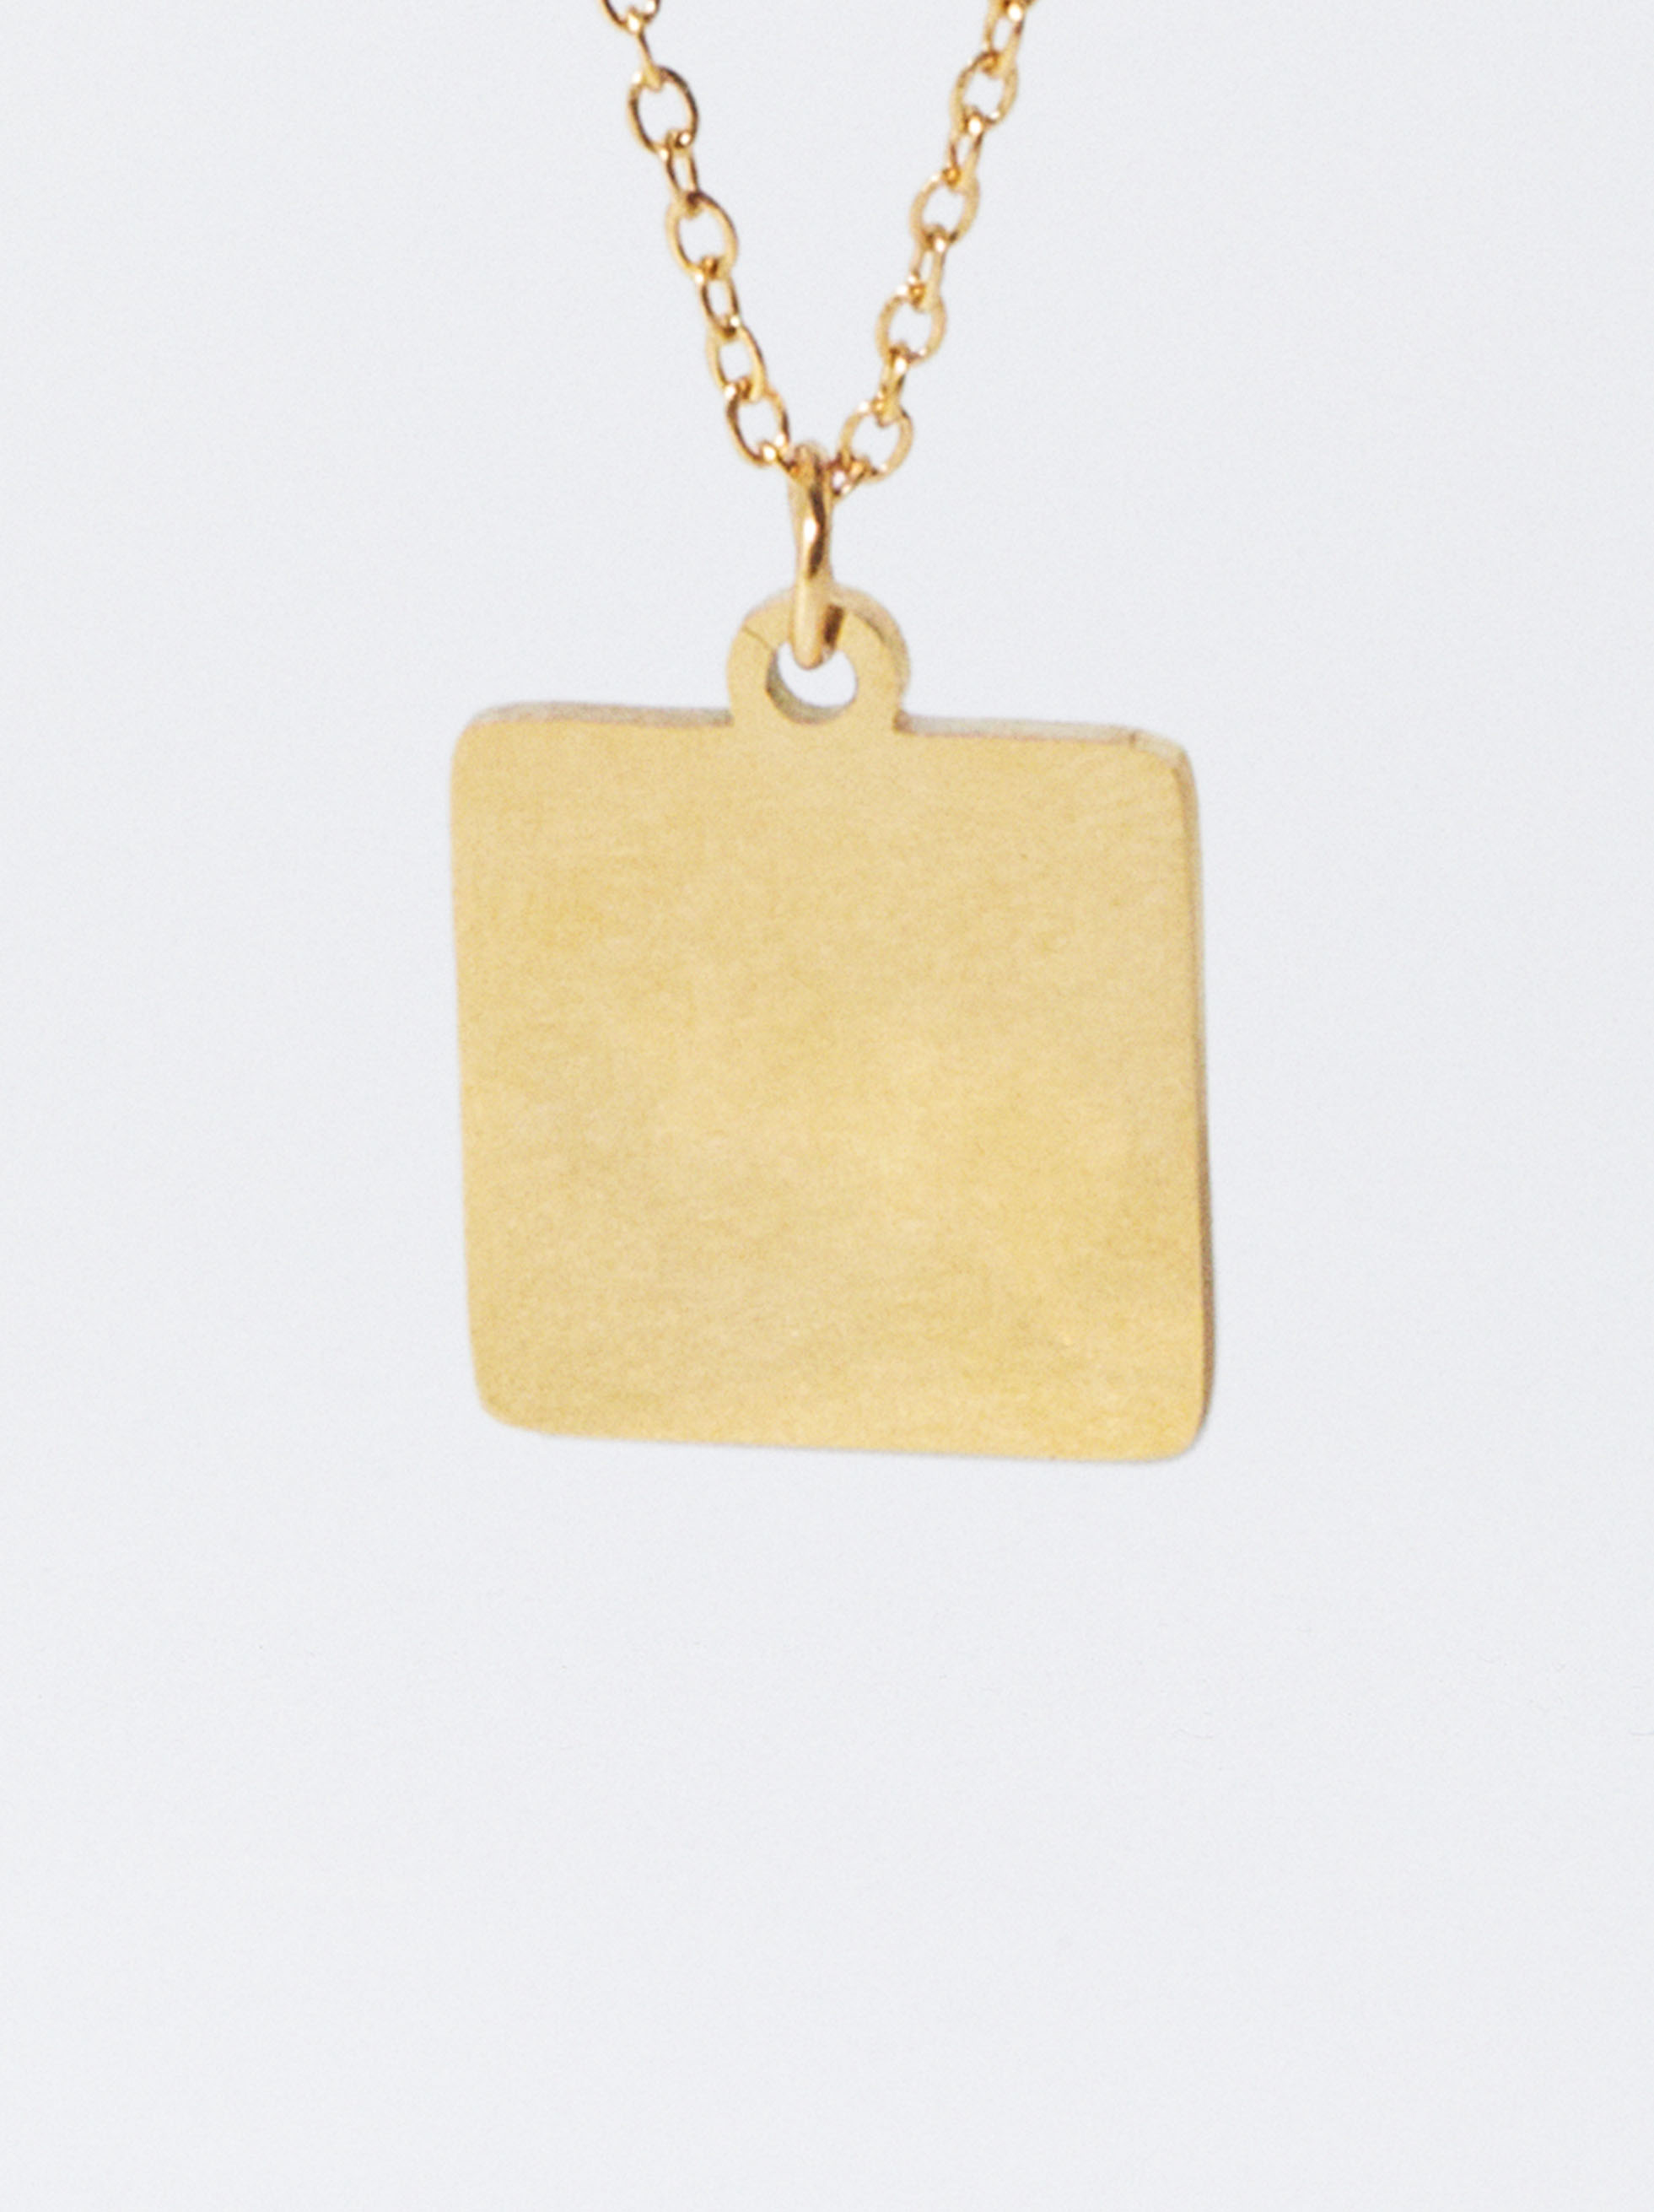 Online Exclusive - Gold Stainless Steel Necklace With Personalized Pendant image number 2.0